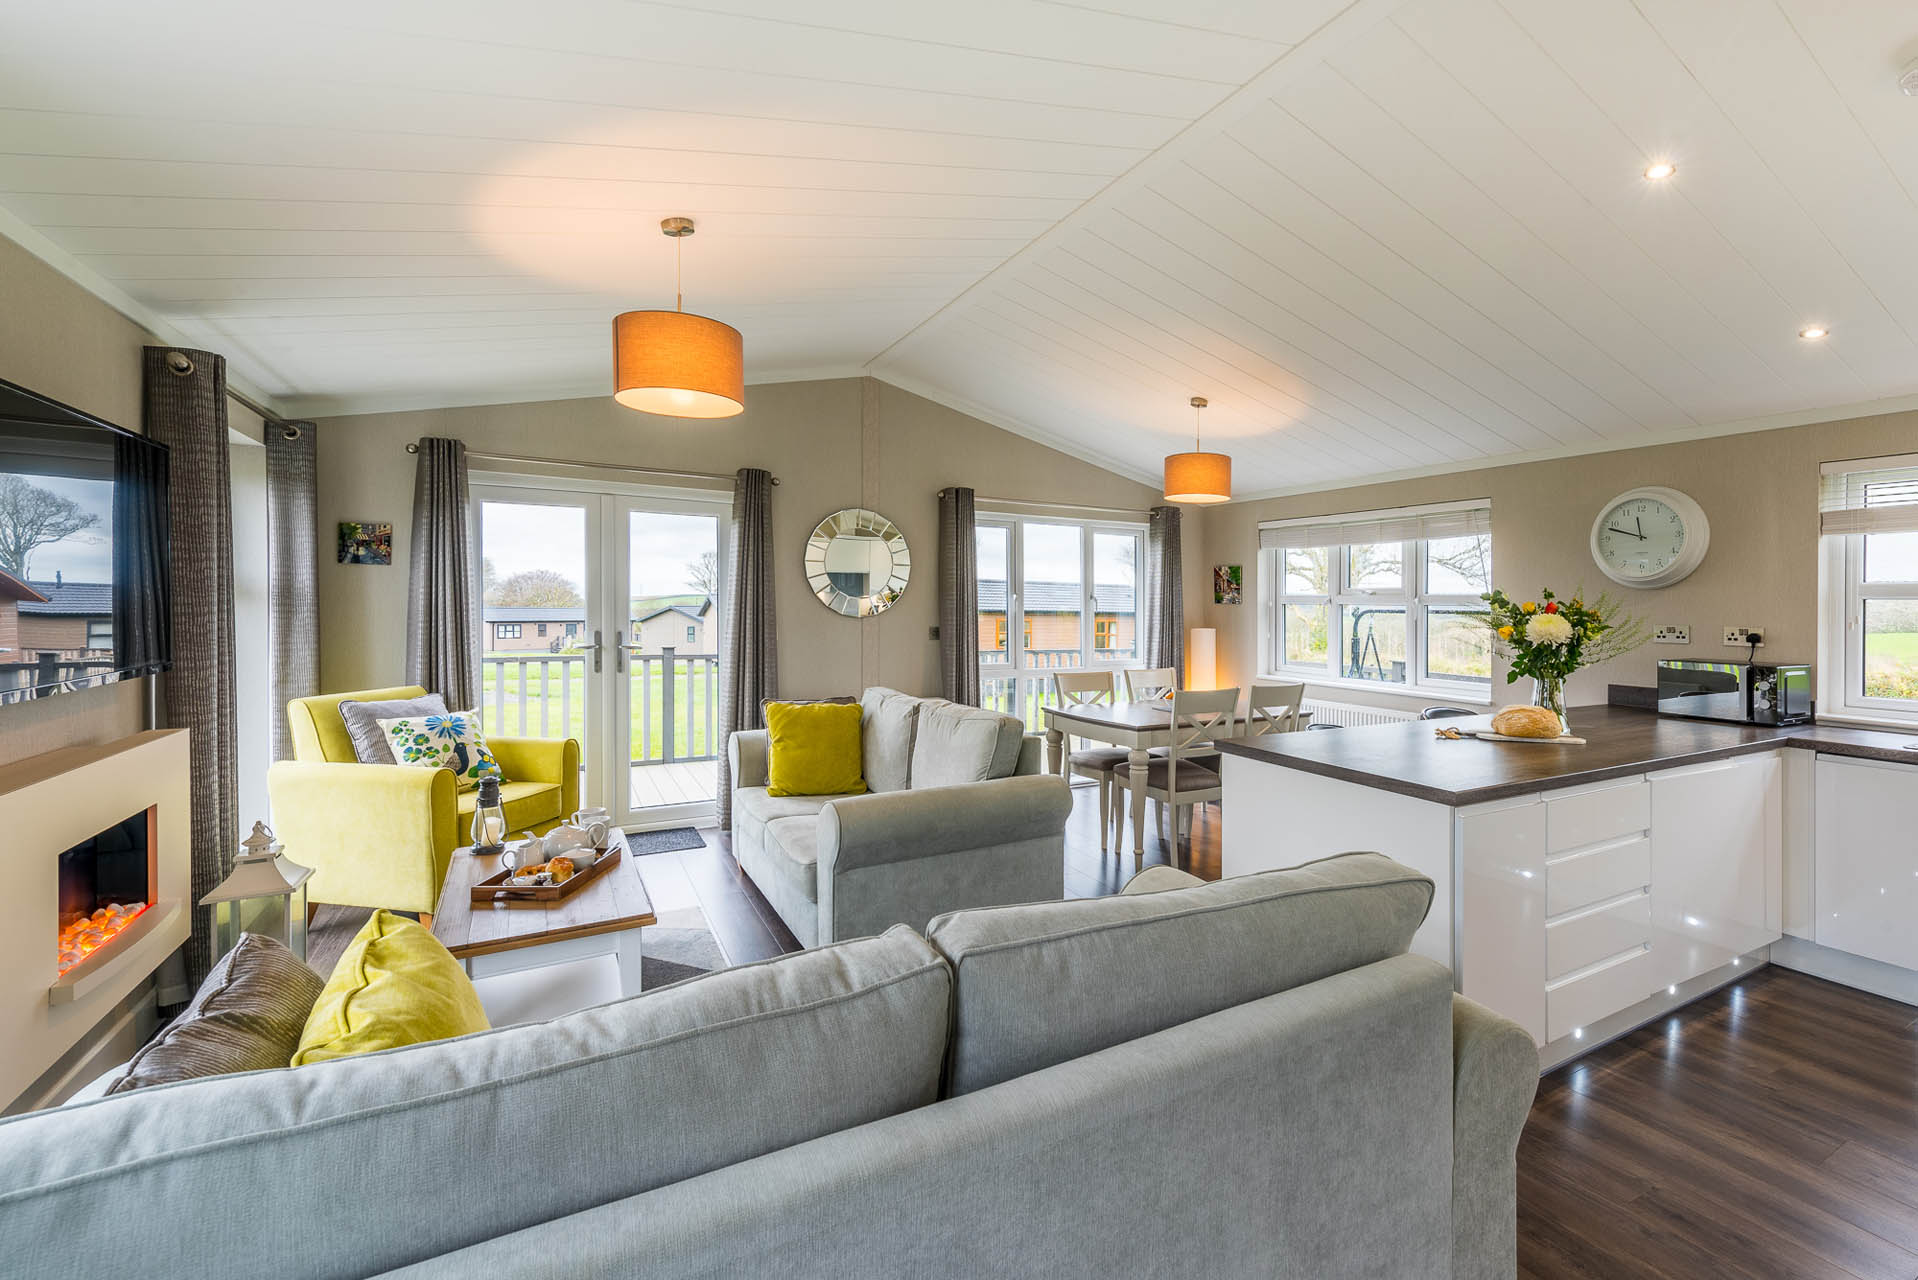 Sunnybanks luxury 2 bedroom holiday lodge at St. Tinney Farm Holidays in Cornwall